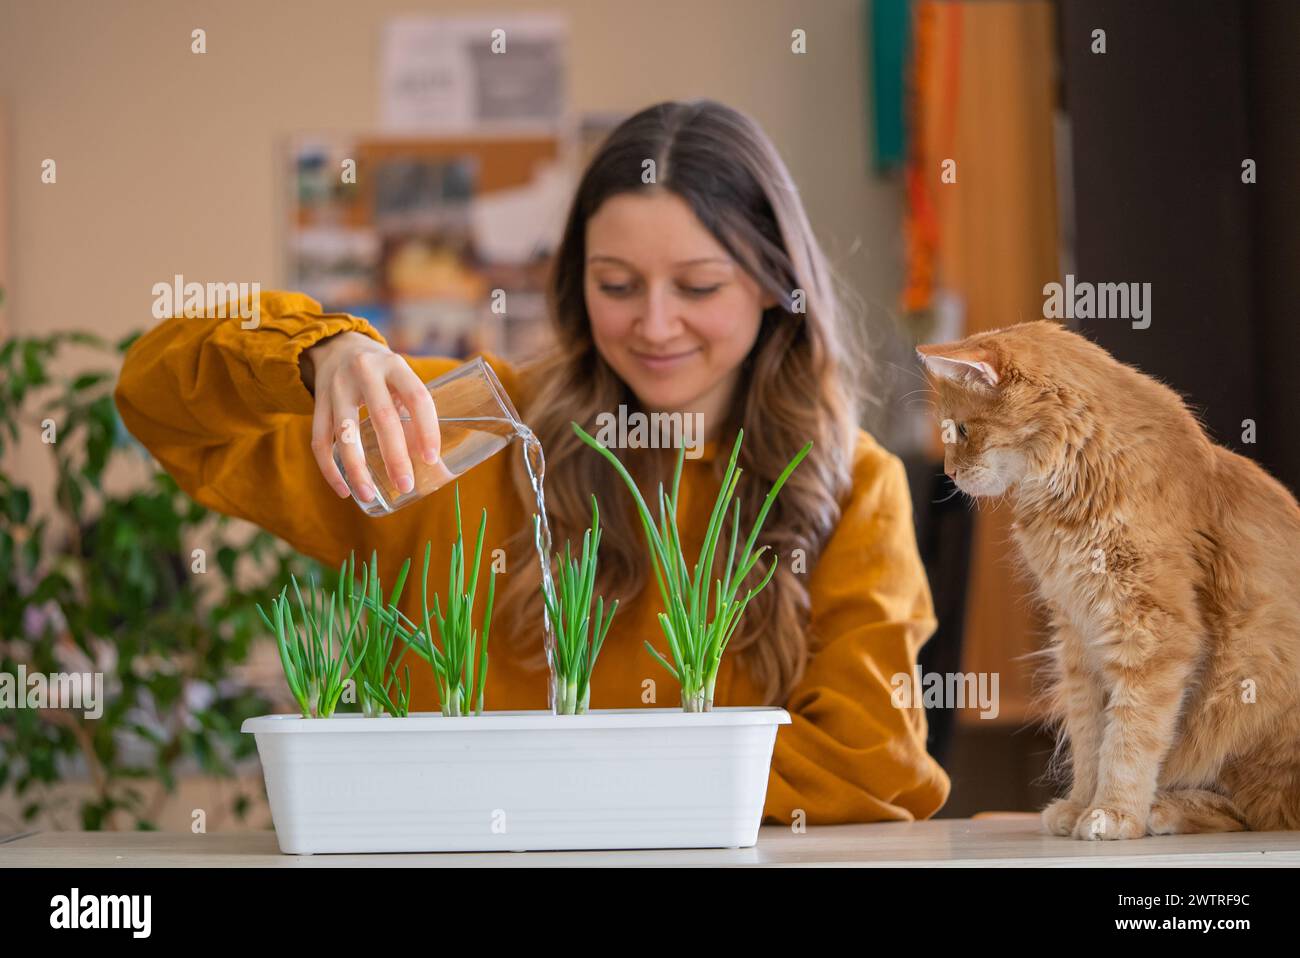 A smiling woman in a mustard sweater waters green onion sprouts in a planter while a curious ginger cat watches, a moment of home gardening bliss Stock Photo